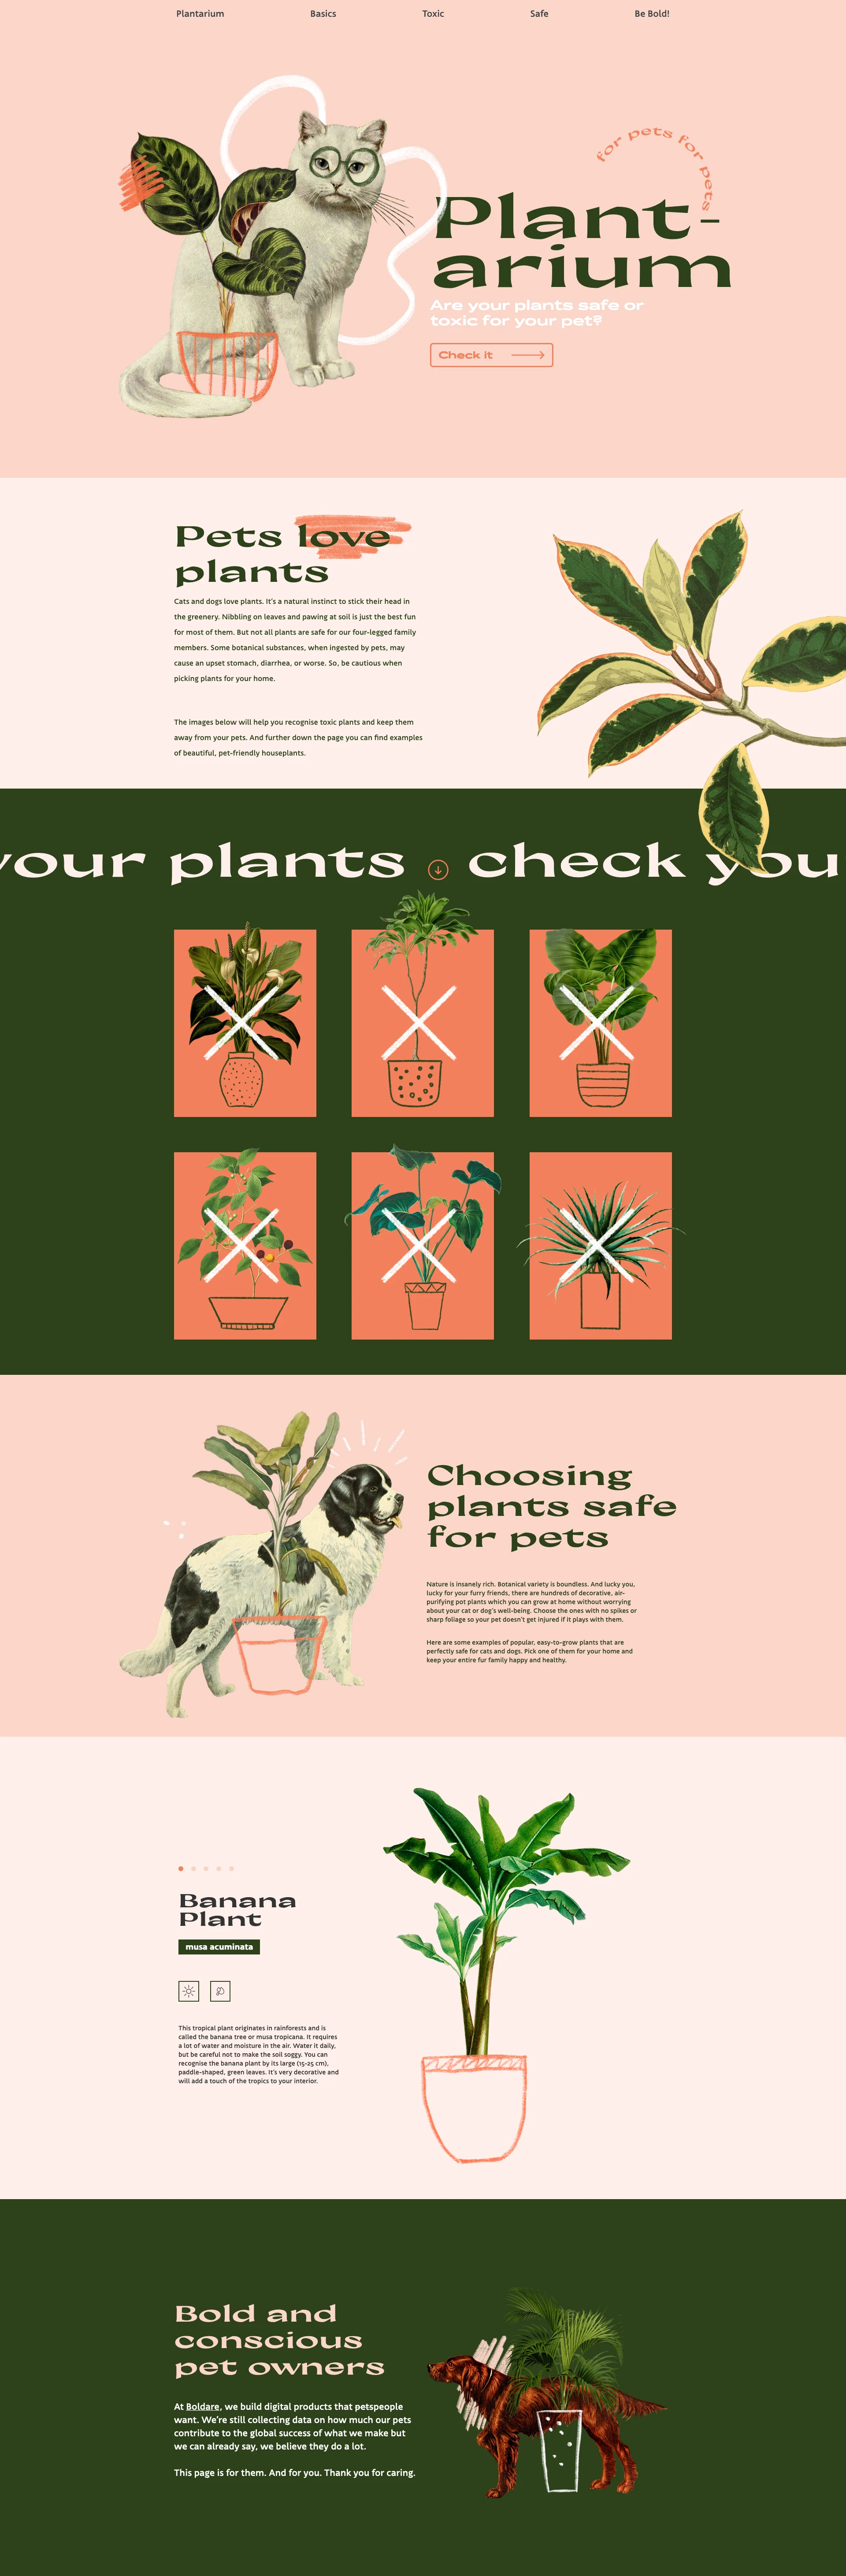 Plantarium Landing Page Example: Are your plants safe or toxic for your pet? Choosing plants safe for pets.